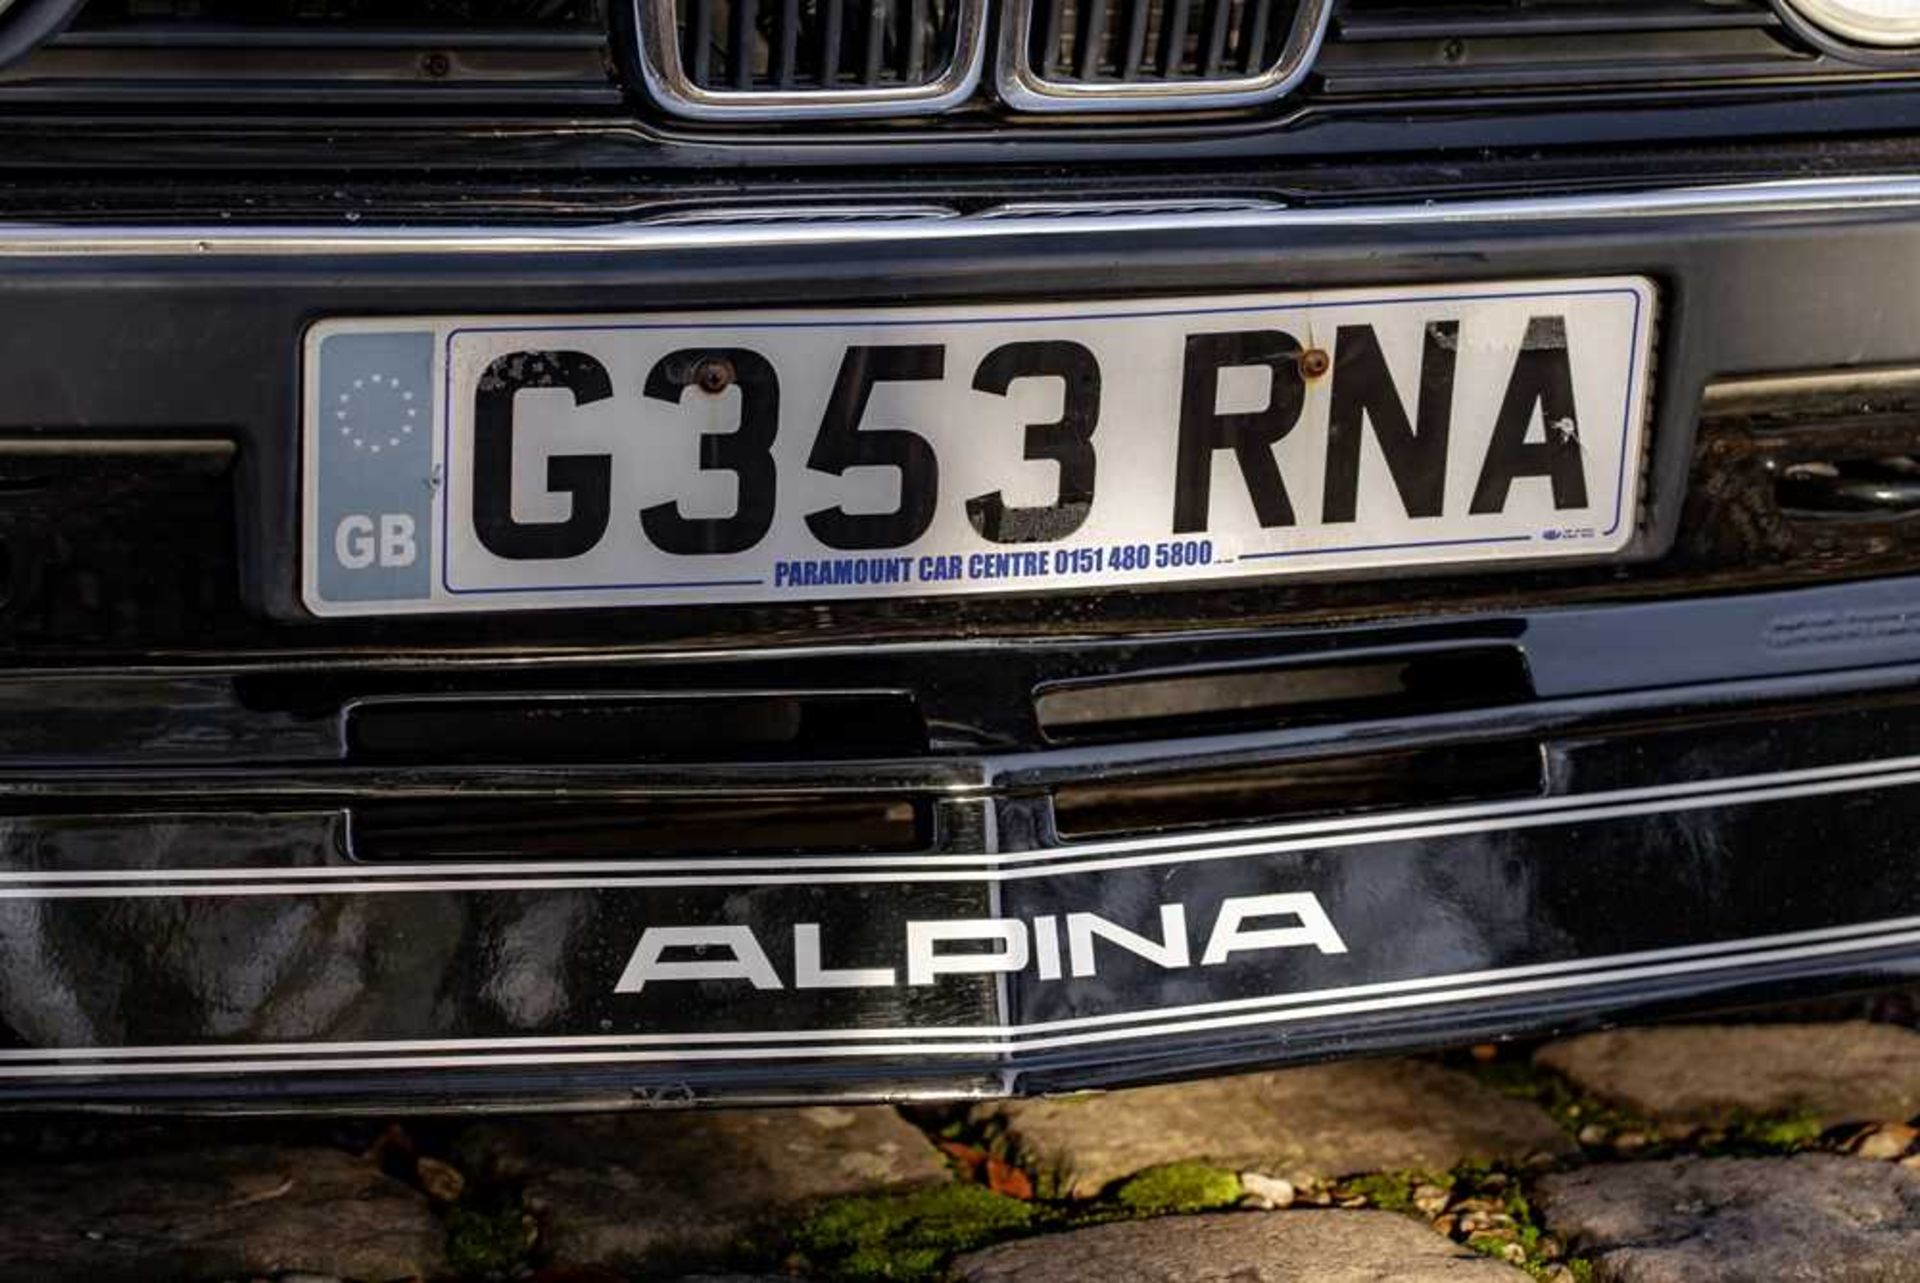 1989 BMW 320i Convertible Converted to Alpina 328i Specification - Image 17 of 51